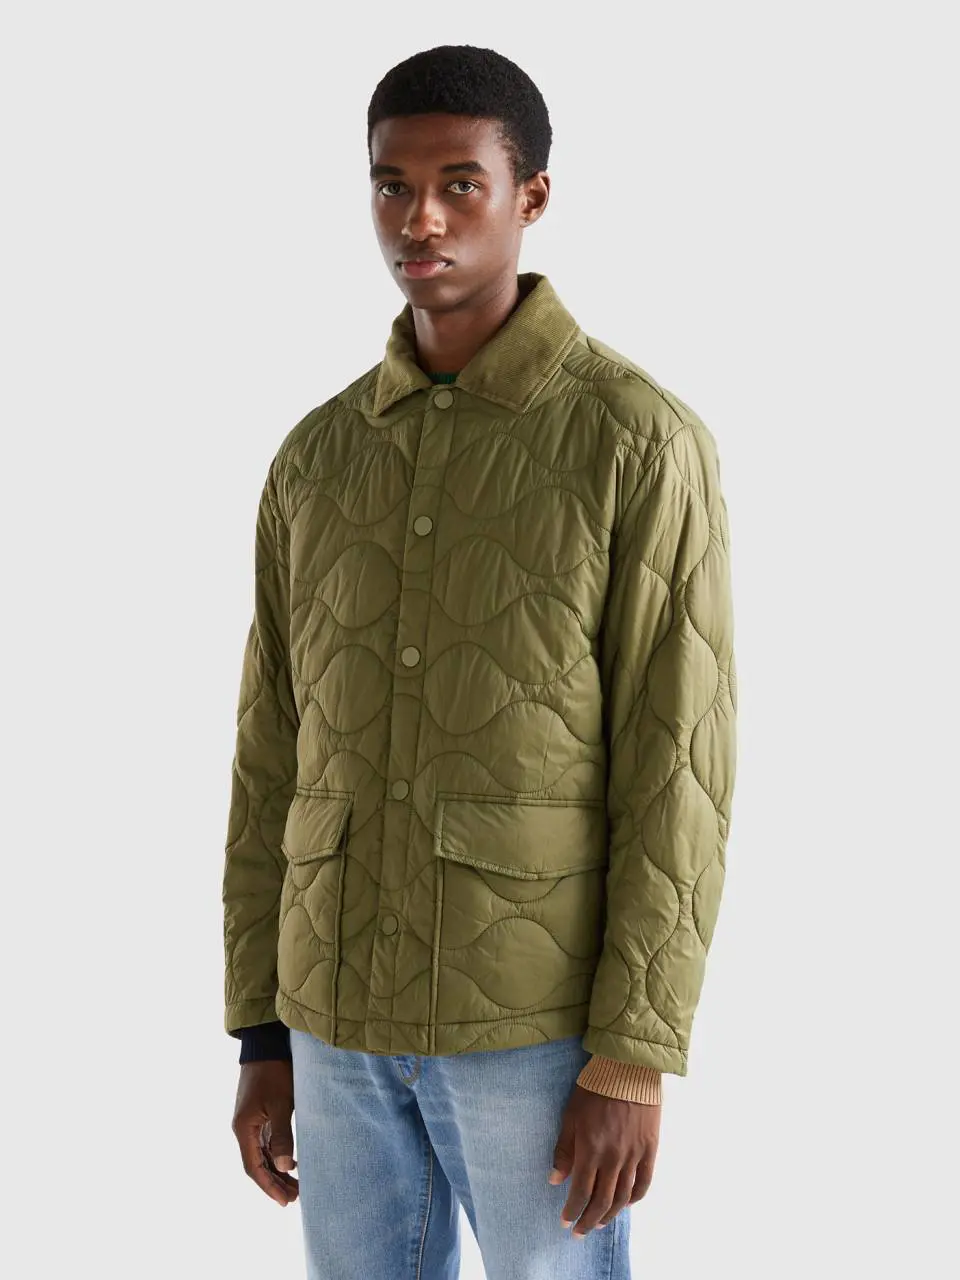 Benetton quilted jacket with collar. 1